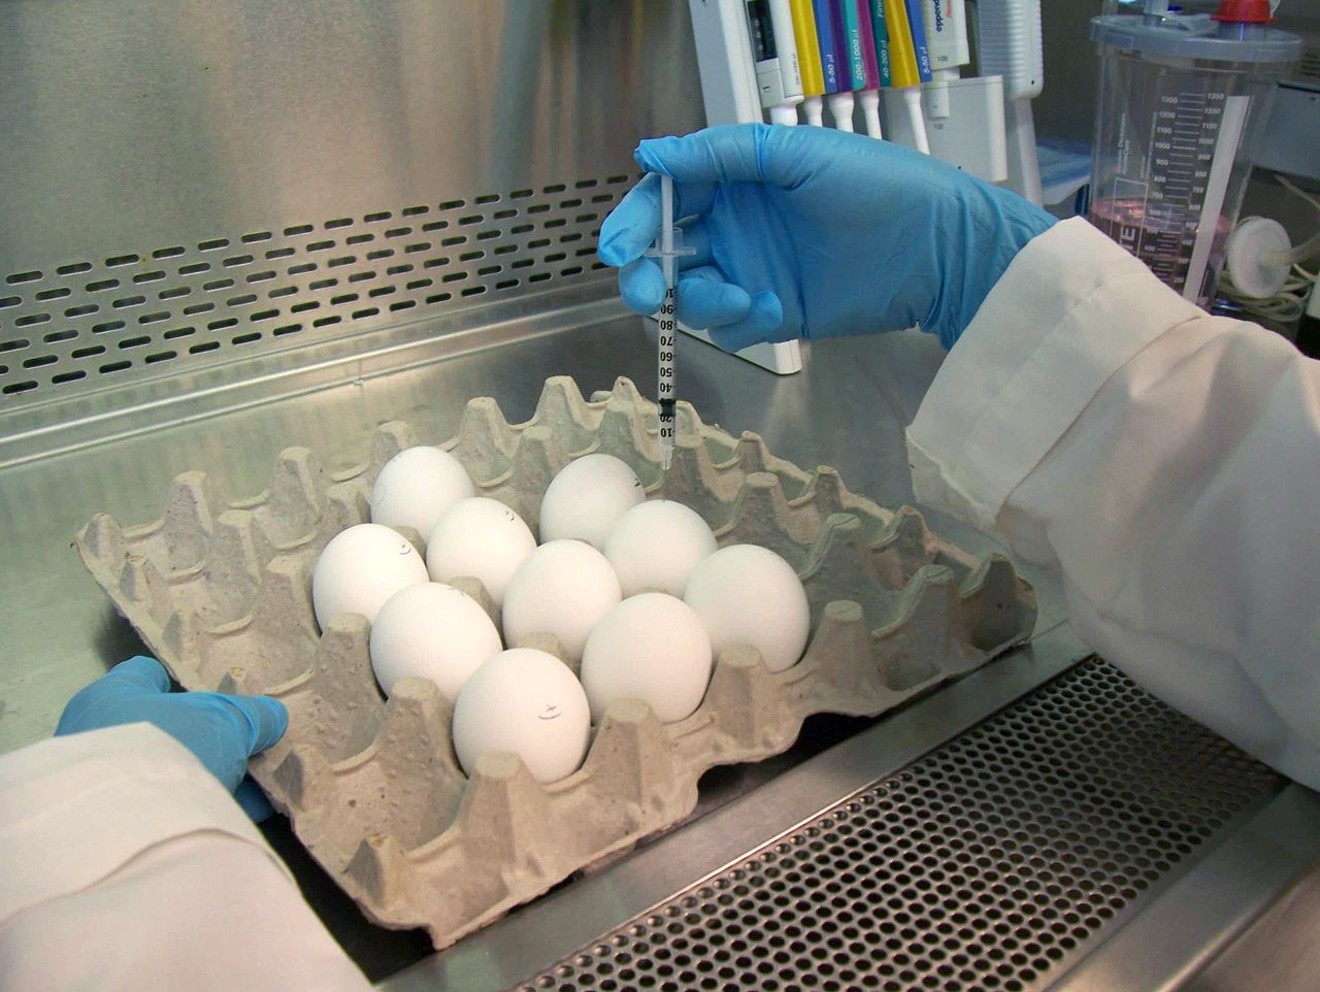 An FDA worker injects eggs with the flu. Eventually materials will be harvested from the eggs to make vaccines.